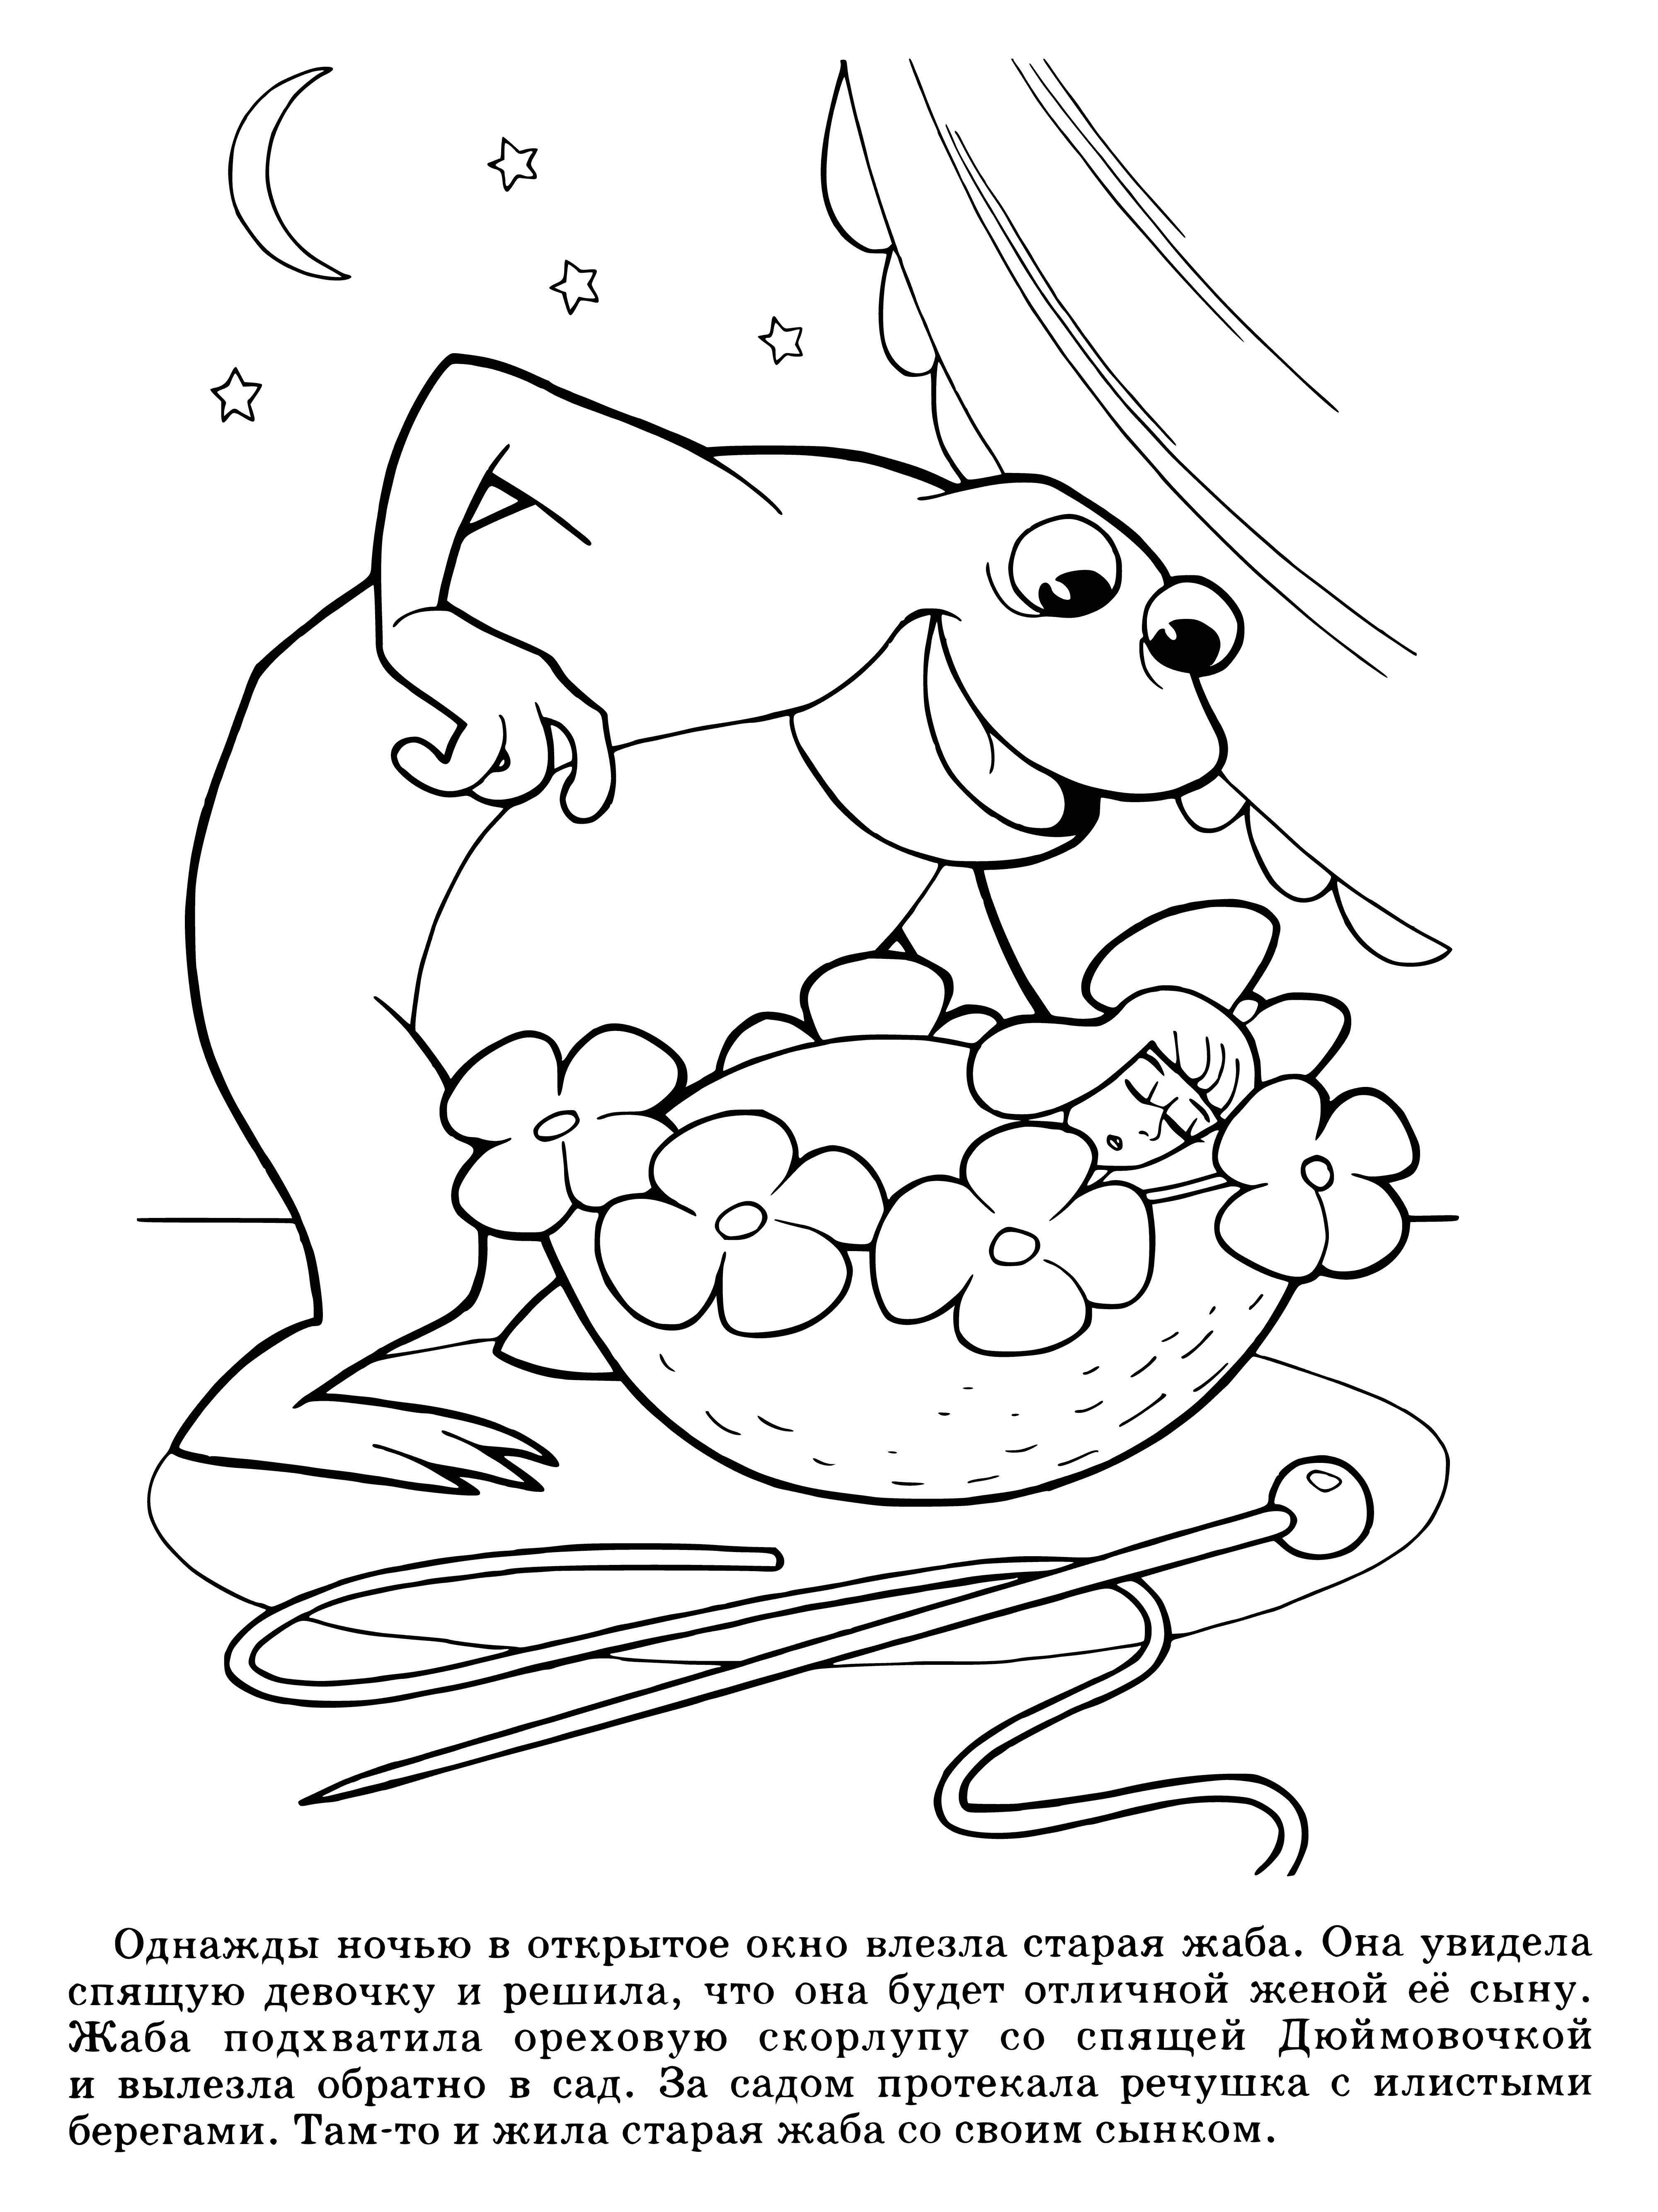 coloring page: Toad sees Thumbelina in coloring page - small girl with blonde hair, wearing white dress with flowers, has wings on her back flying near flower.